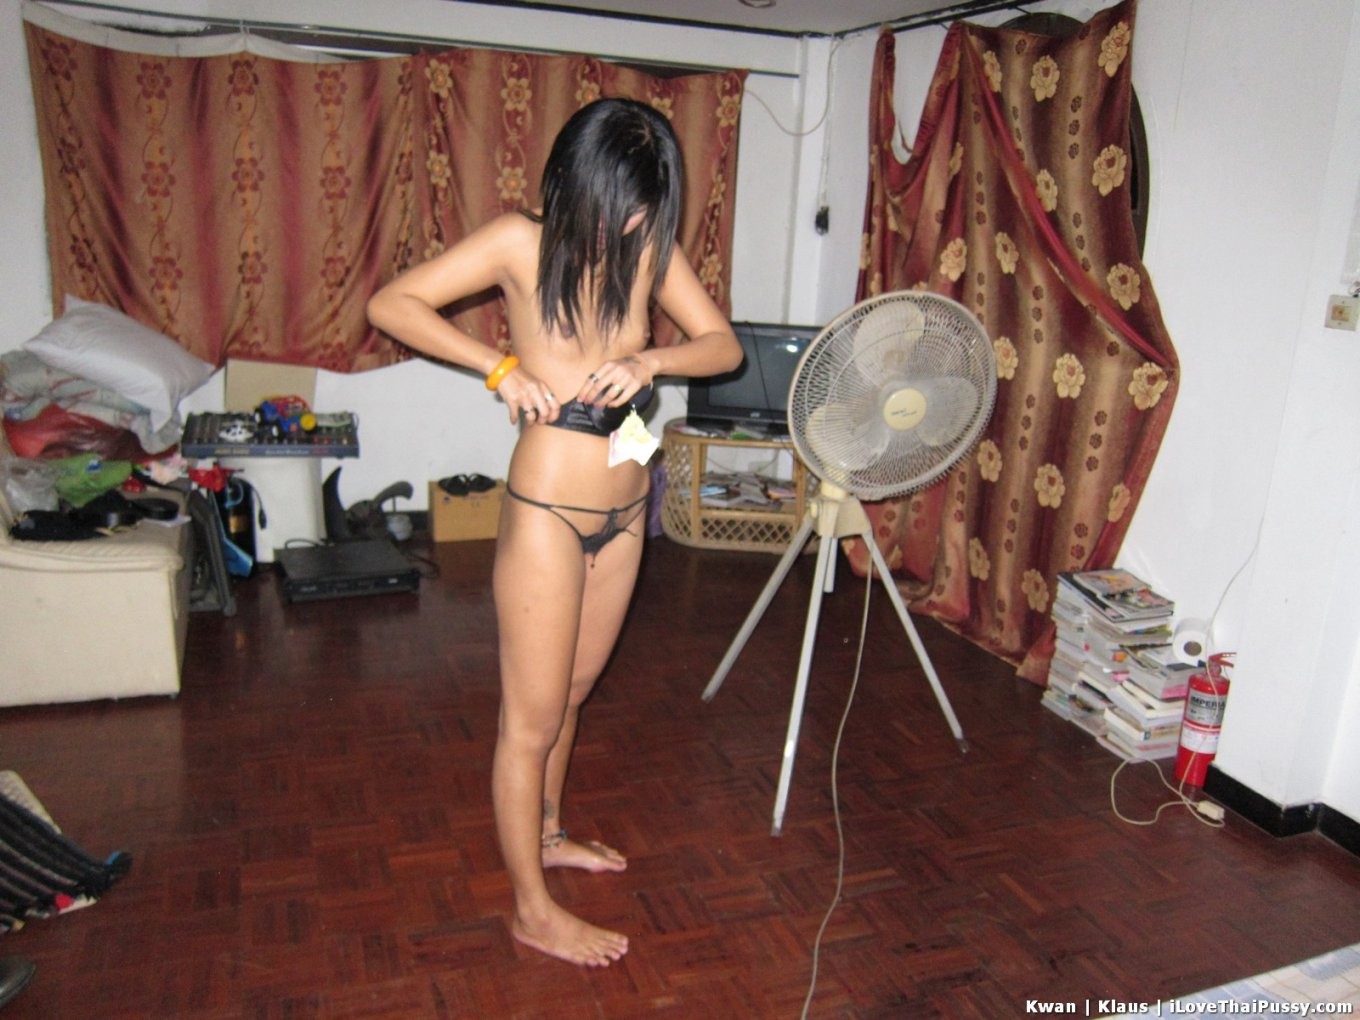 Filthy Thai Prostitute loves no condom anal sex with dirty tourists asian amateu #68115636